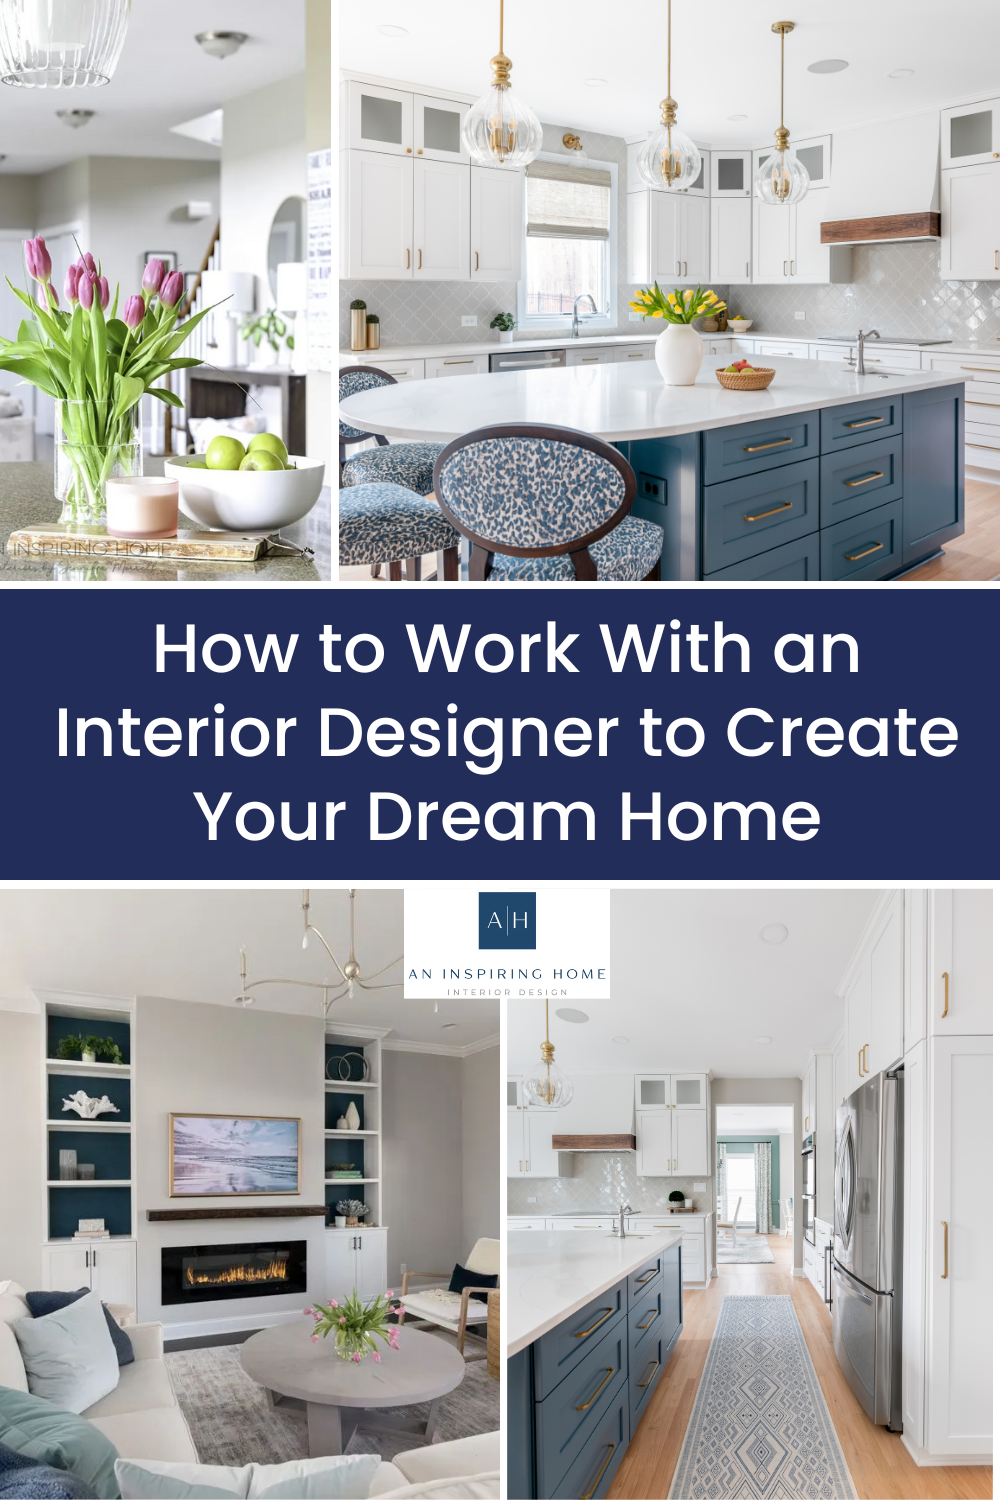 How to Work with an Interior Designer to Create Your Dream Home